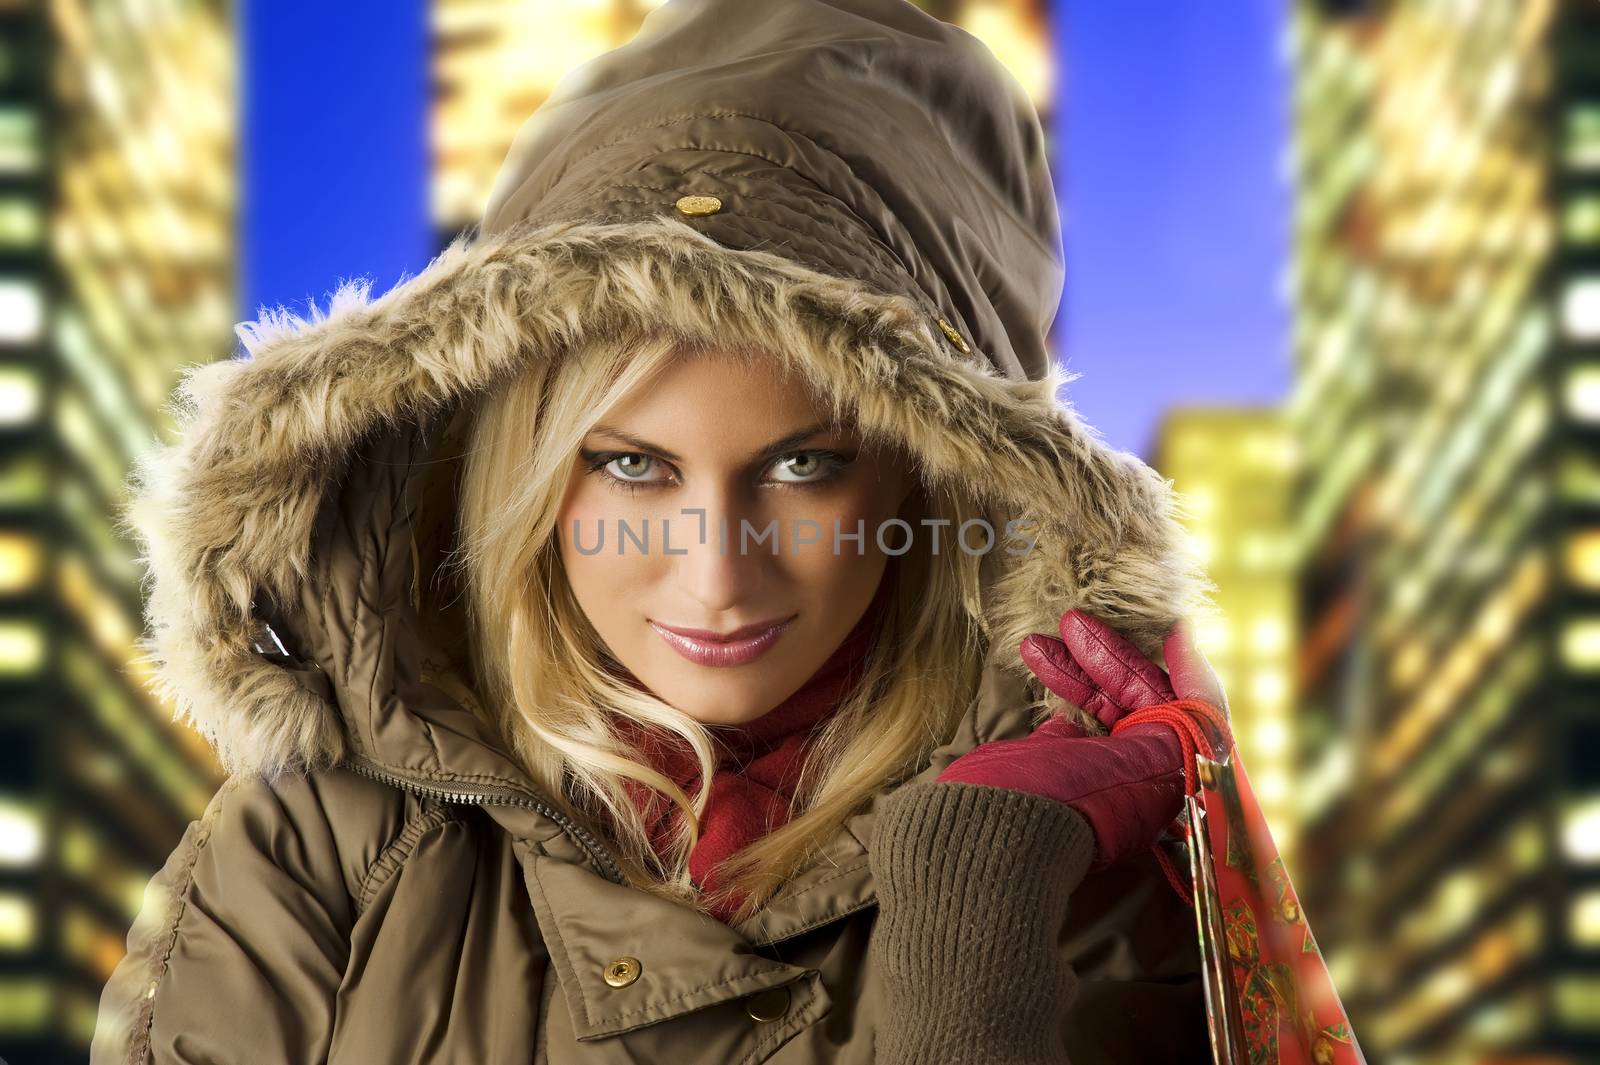 close up portrait of blond young woman in winter jacket covering head with hood